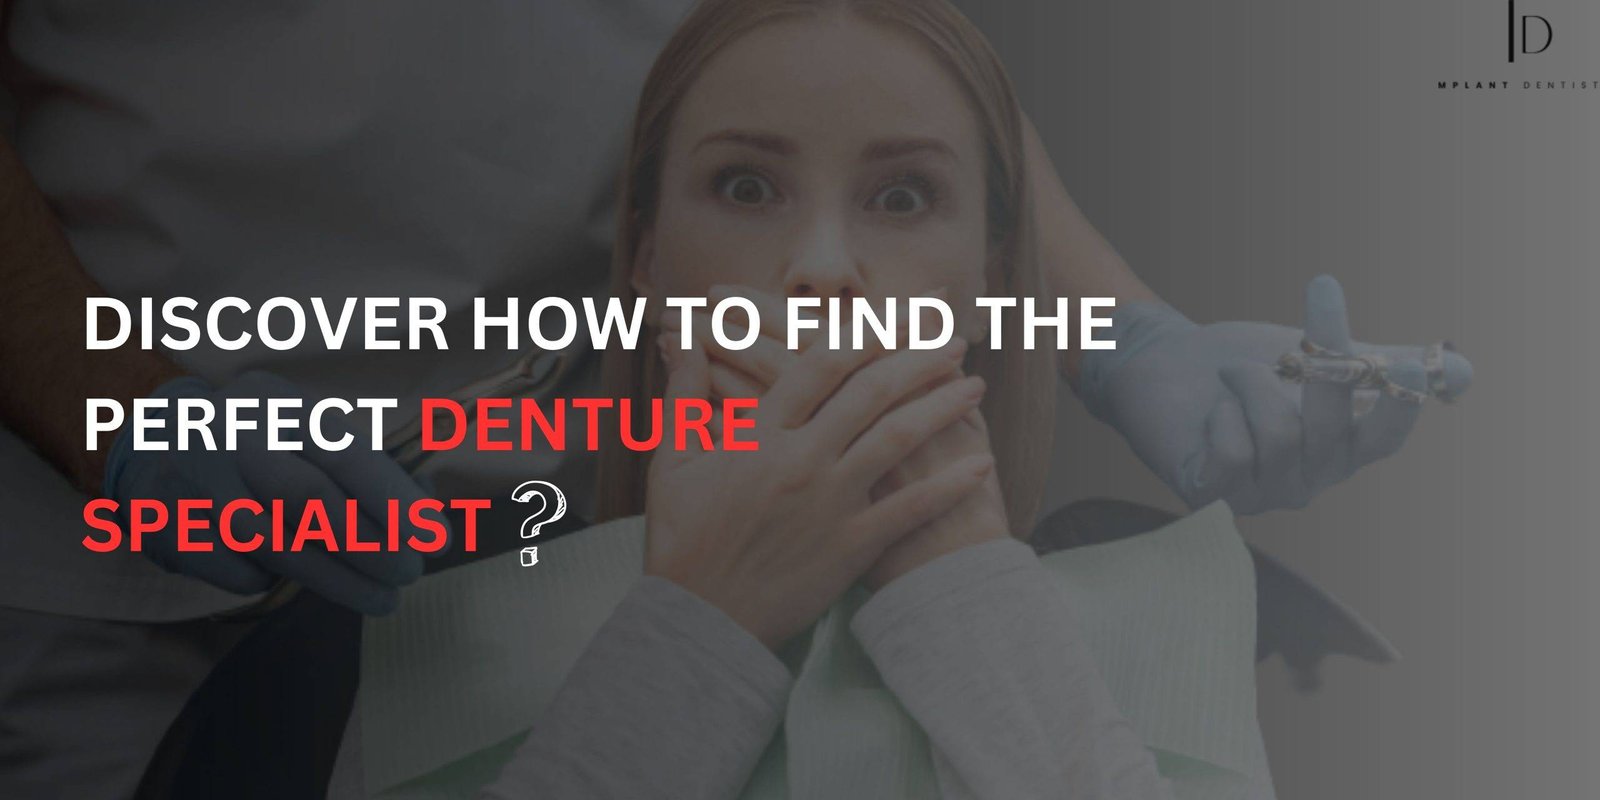 How to Find the Right Denture Specialists for Your Needs